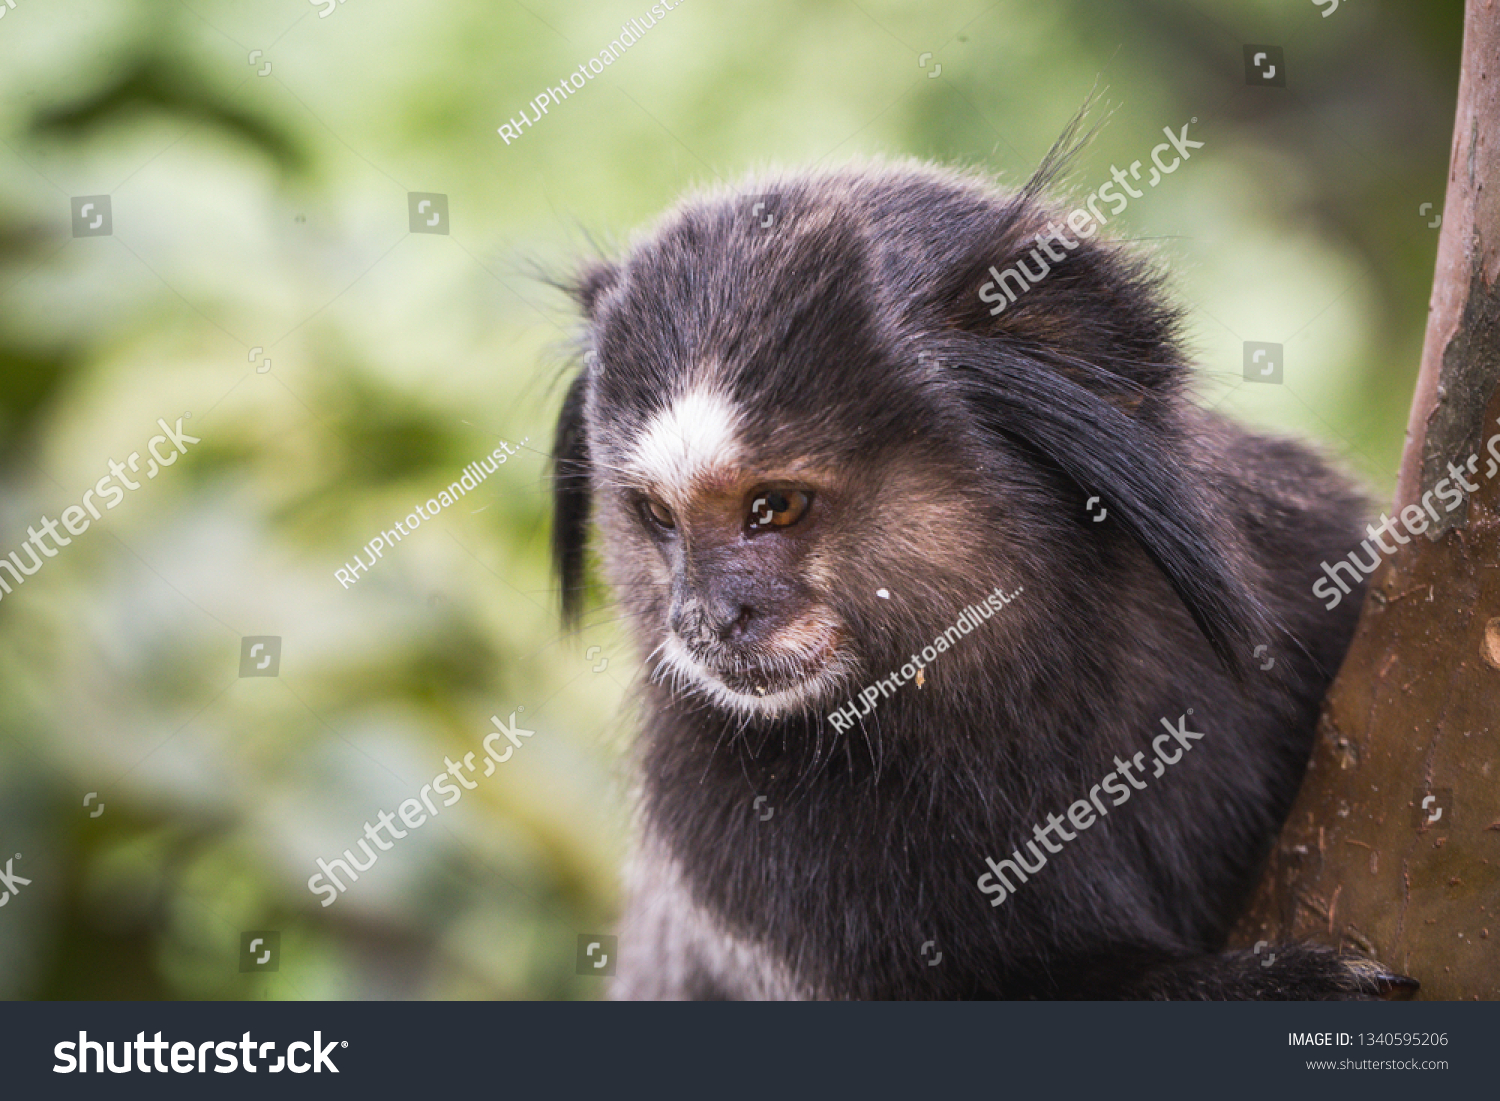 Small Monkey Danger Extinction Face Young Animals Wildlife Stock Image 1340595206,Gerbera Daisies Pictures